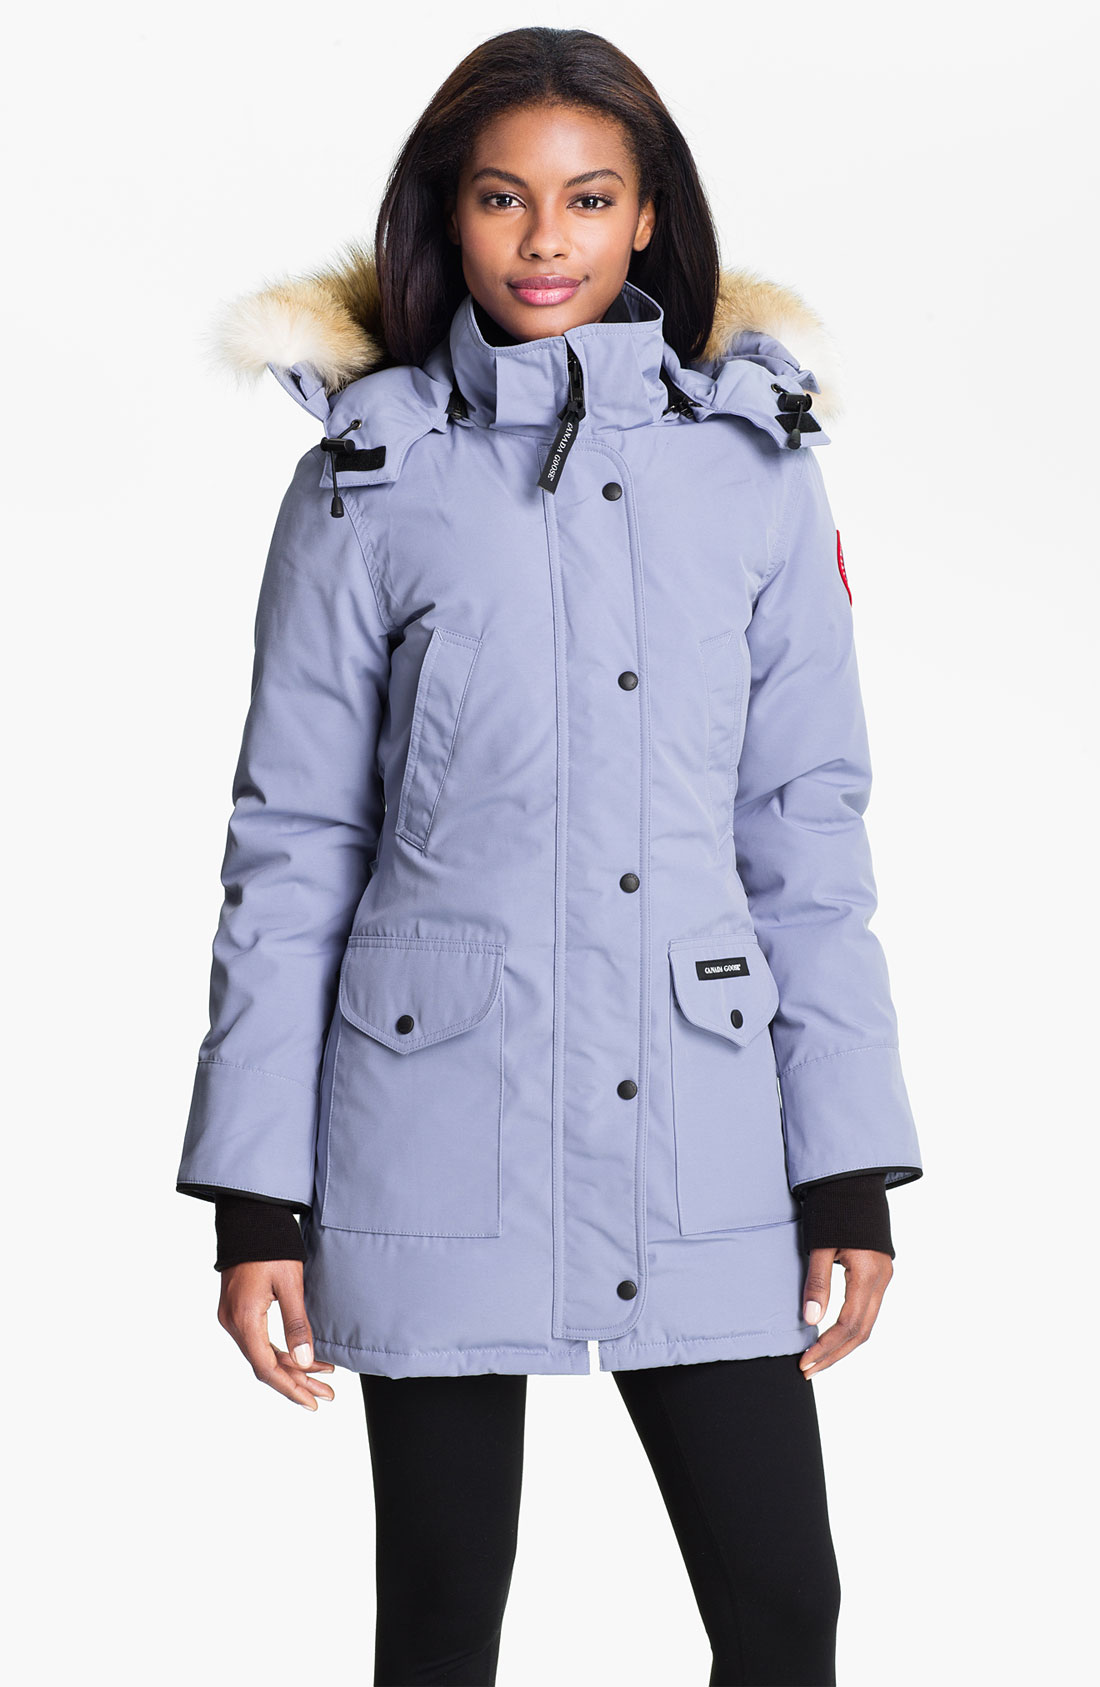 Canada Goose toronto outlet discounts - canada-goose-arctic-frost-grey-trillium-parka-with-genuine-coyote-fur-trim-product-2-5772868-185676194.jpeg